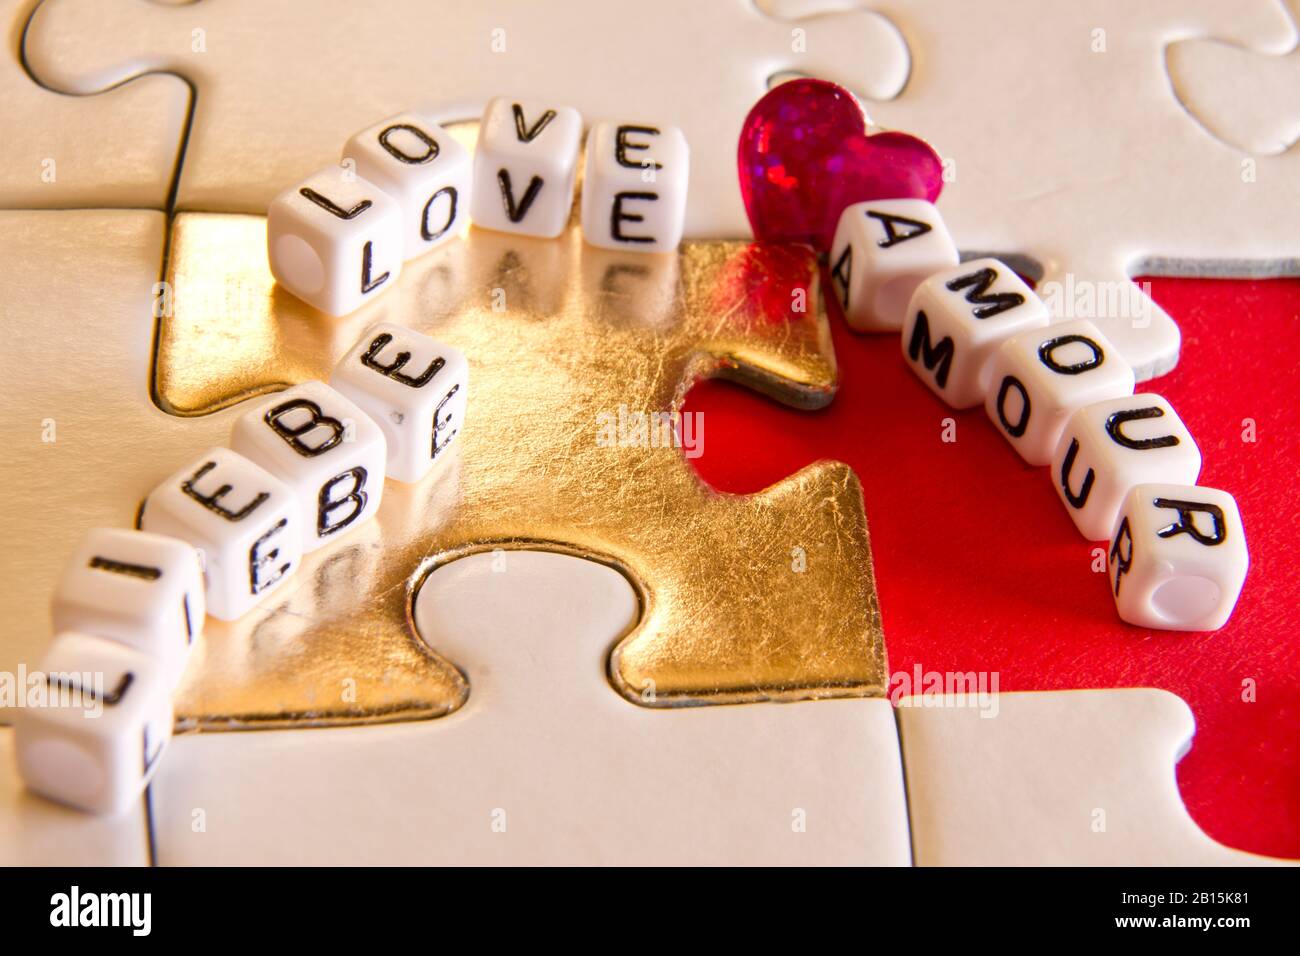 Echte Liebe, Amore, Amour Foto Stock